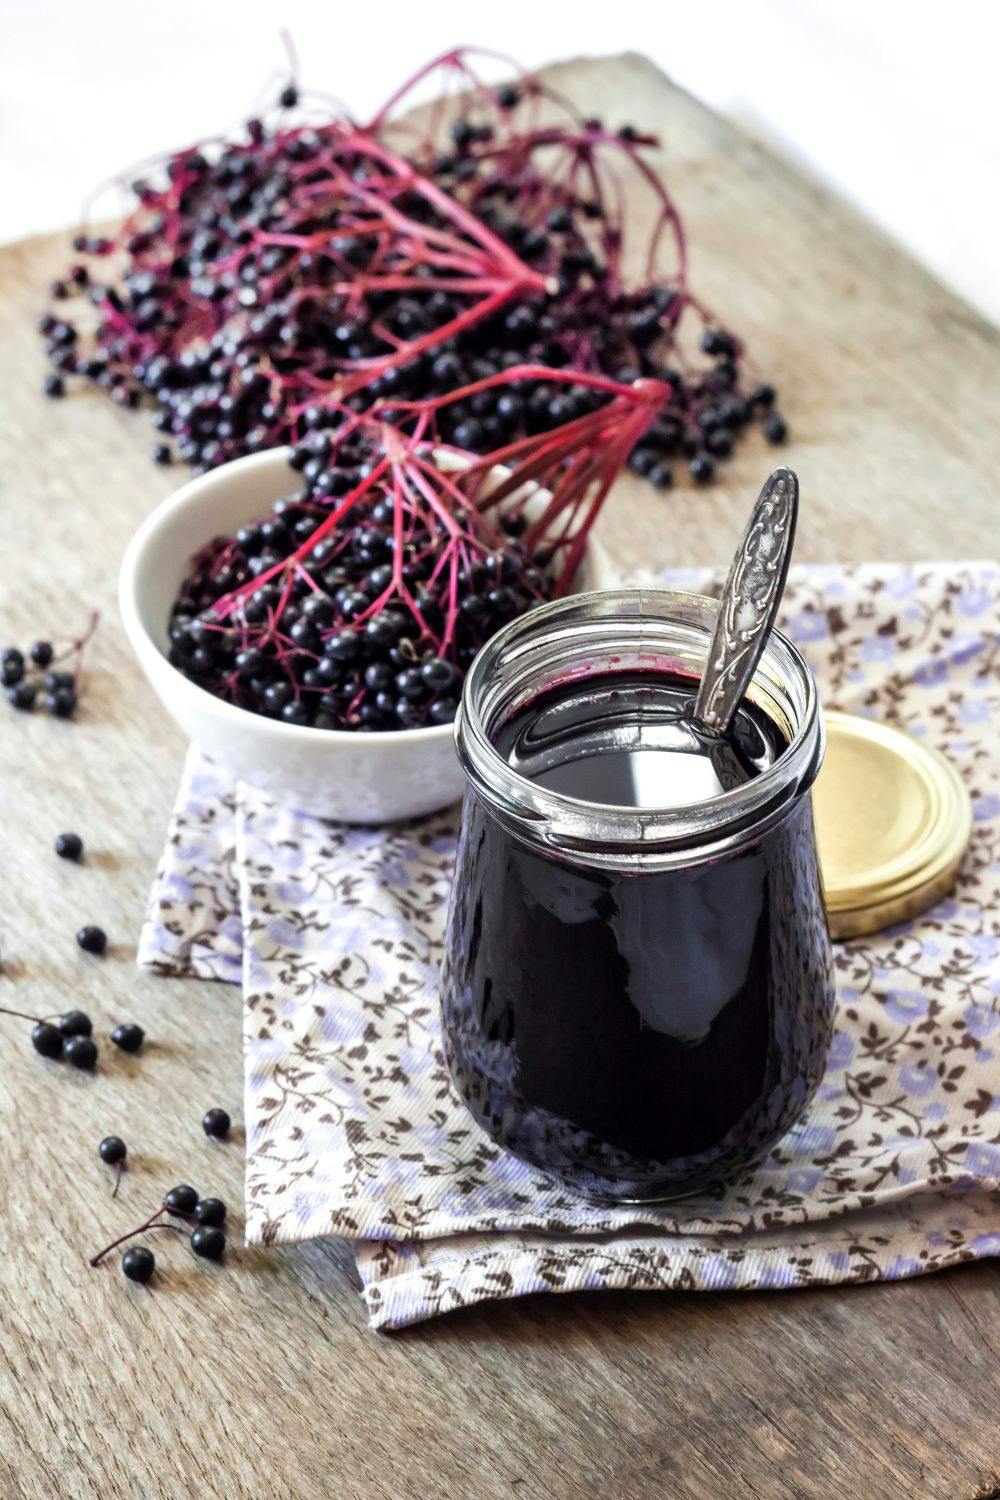 Elderberry sales are declining, but experts aren’t worried. Here’s why.